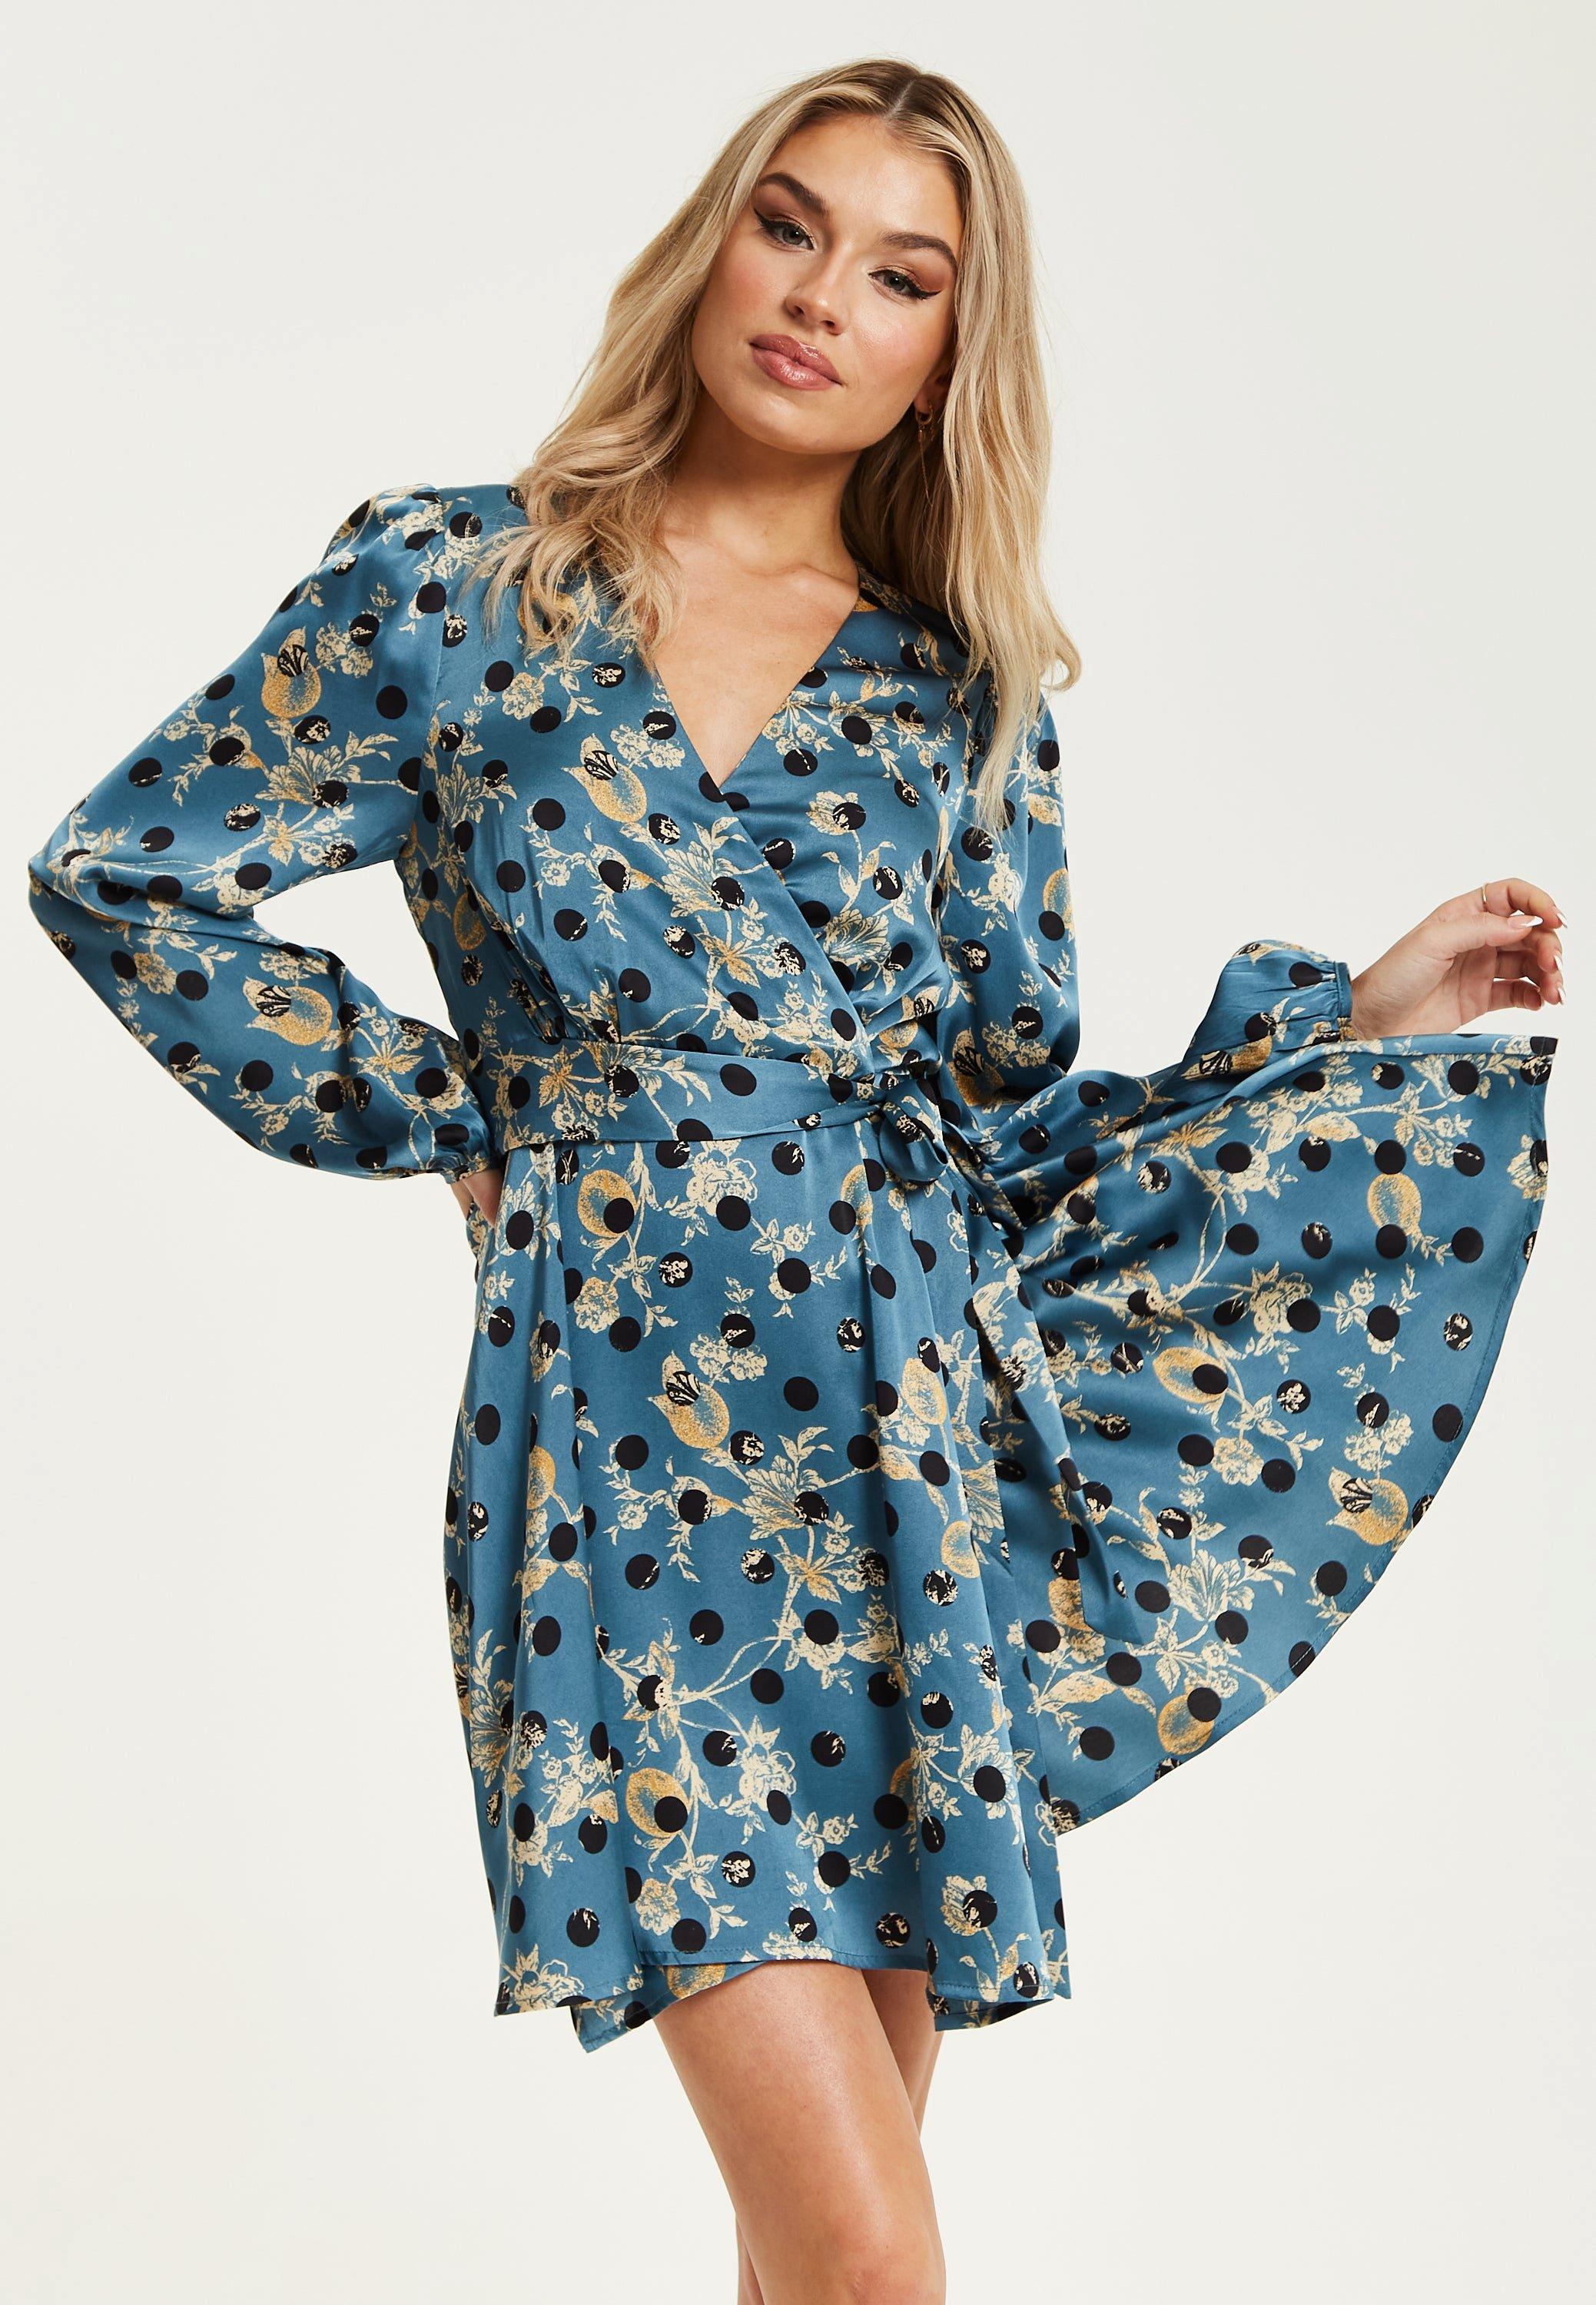 Gold Floral And Black Polka Dot Print Mini Wrap Dress With Long Sleeves In Petrol Blue